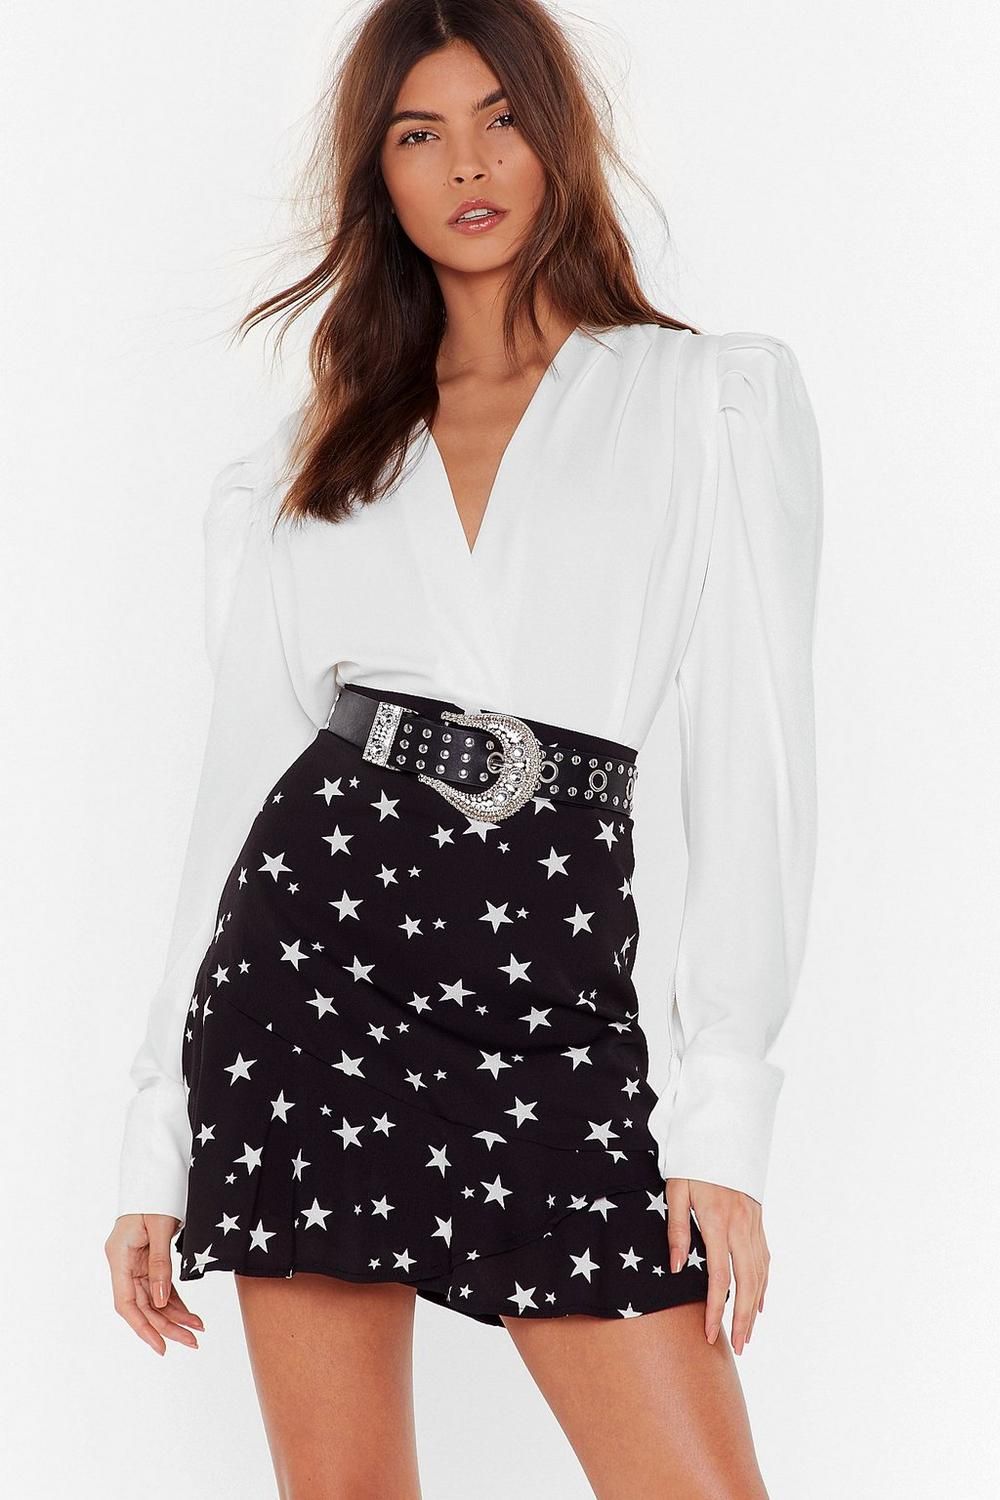 Star-t As You Mean to Go On Mini Skirt | NastyGal (US & CA)